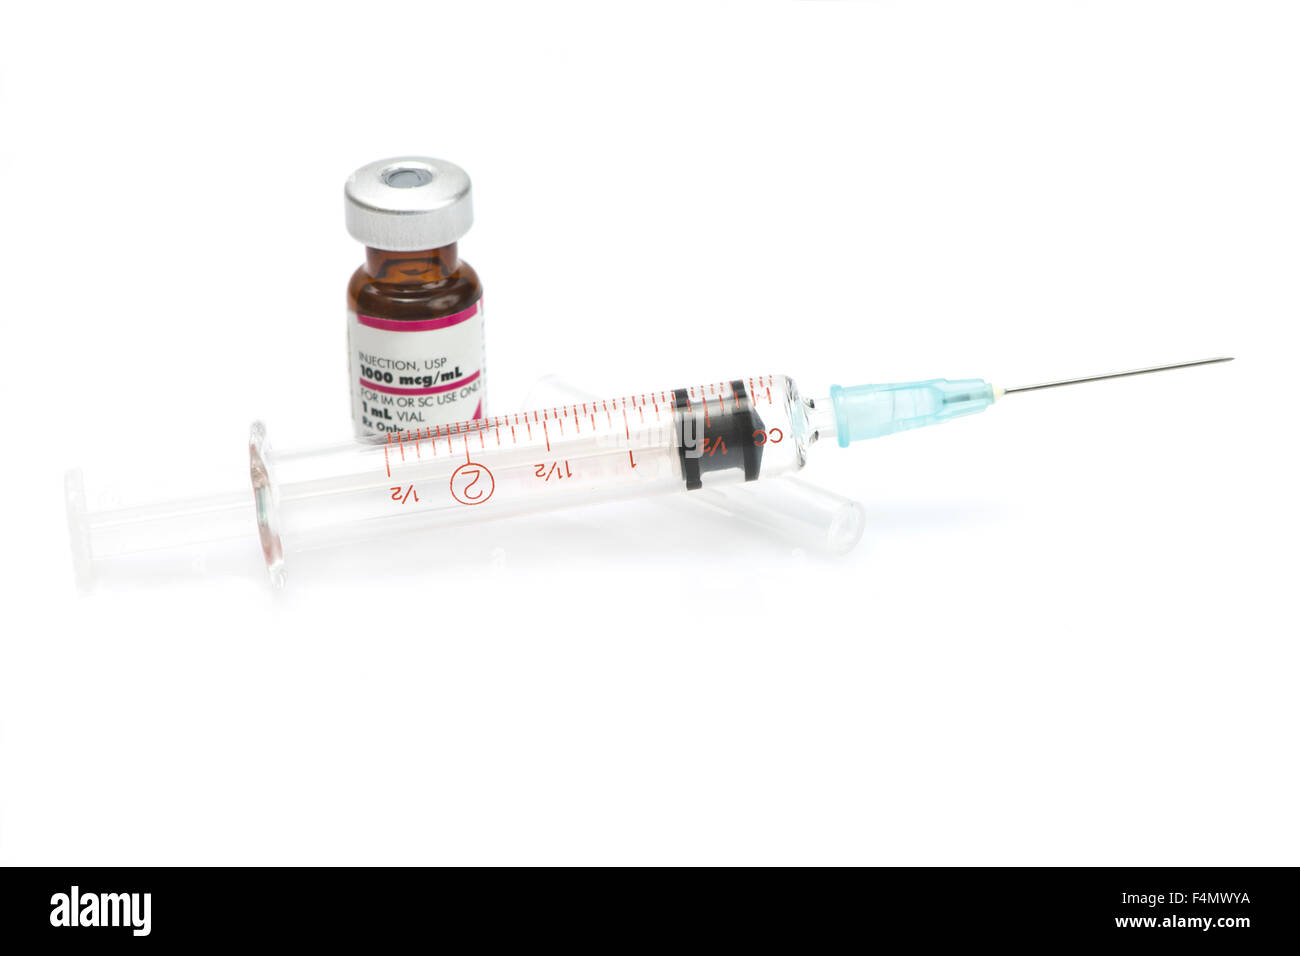 Syringe and vaccine vial on white background. Stock Photo